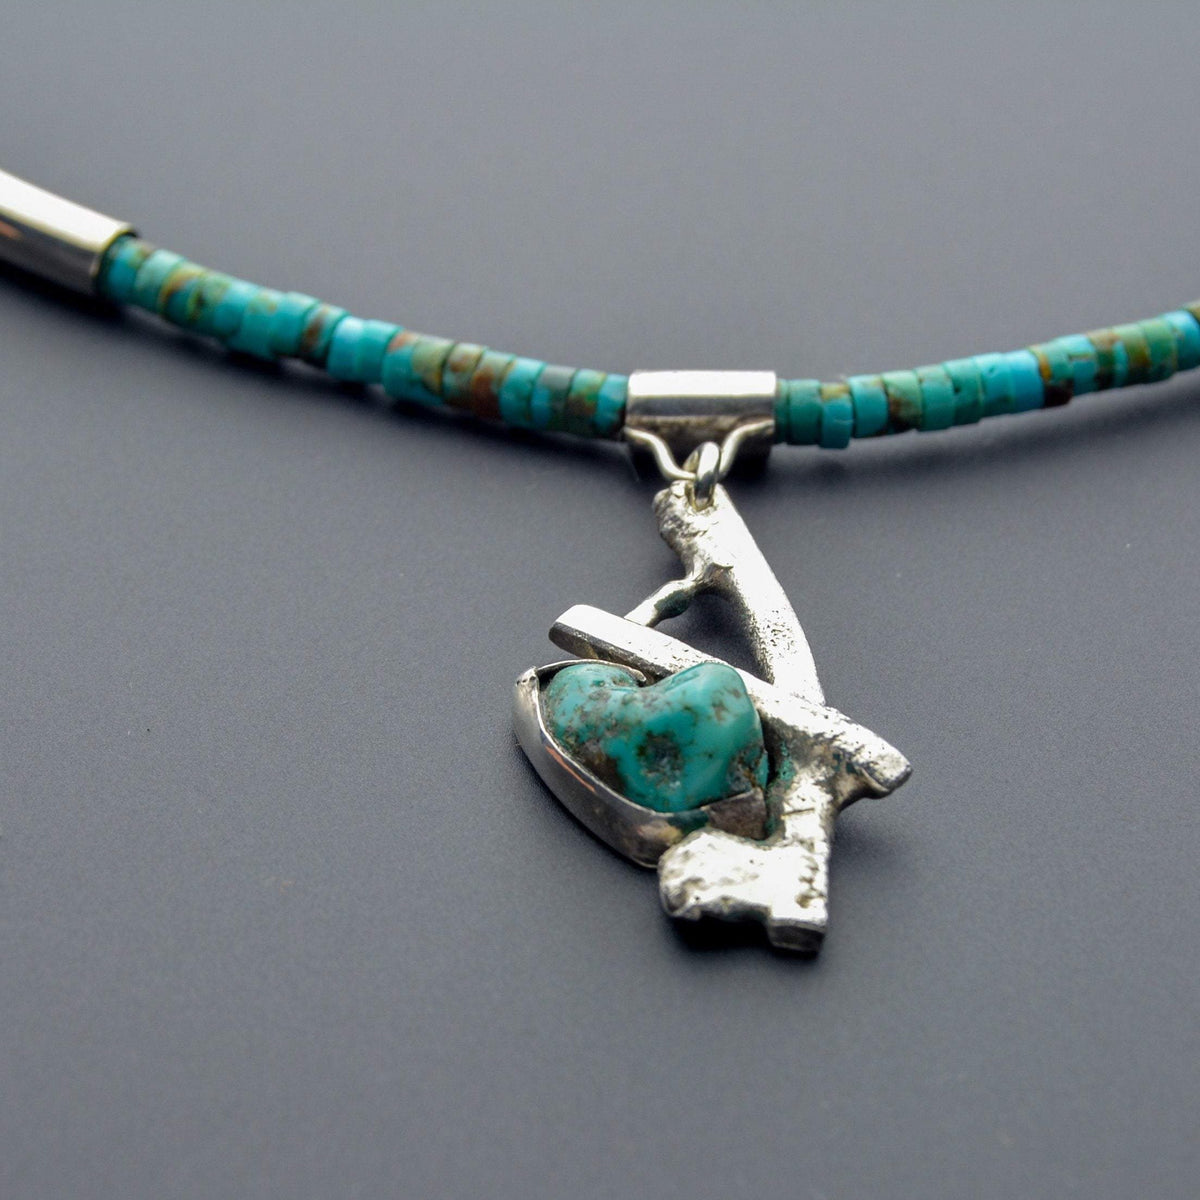 One of a kind turquoise jewelry choker